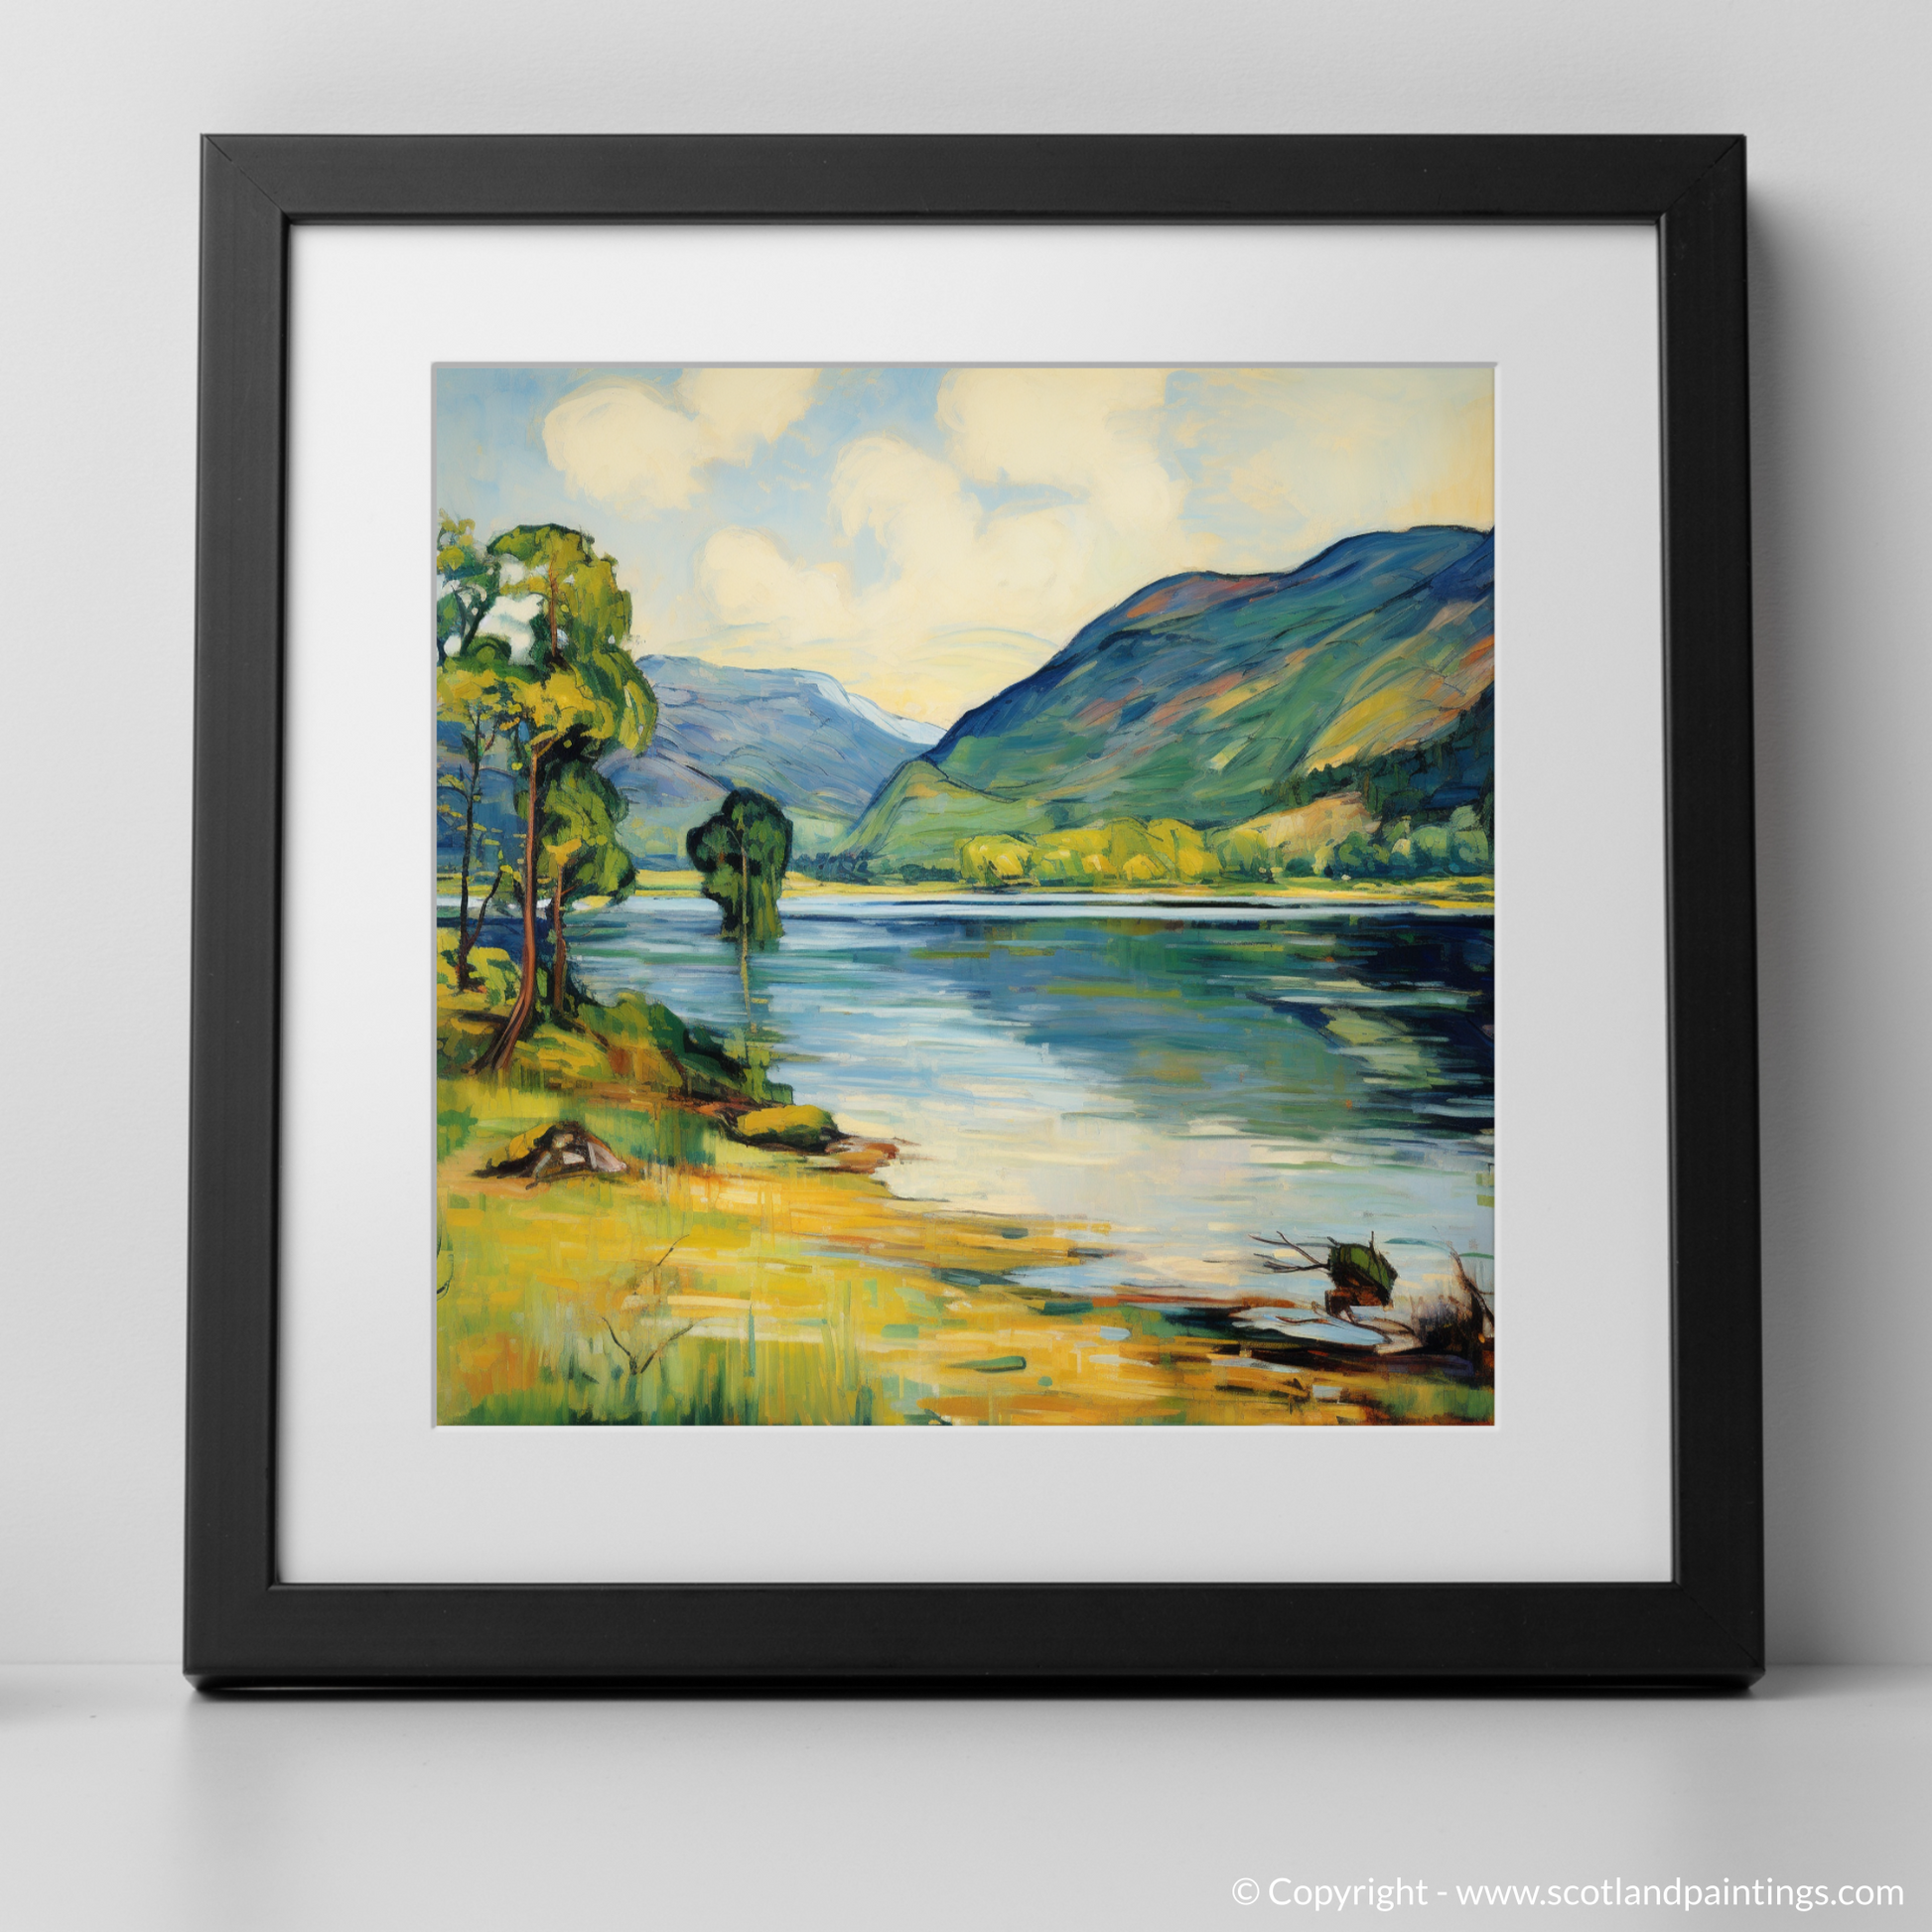 Art Print of Loch Voil in summer with a black frame